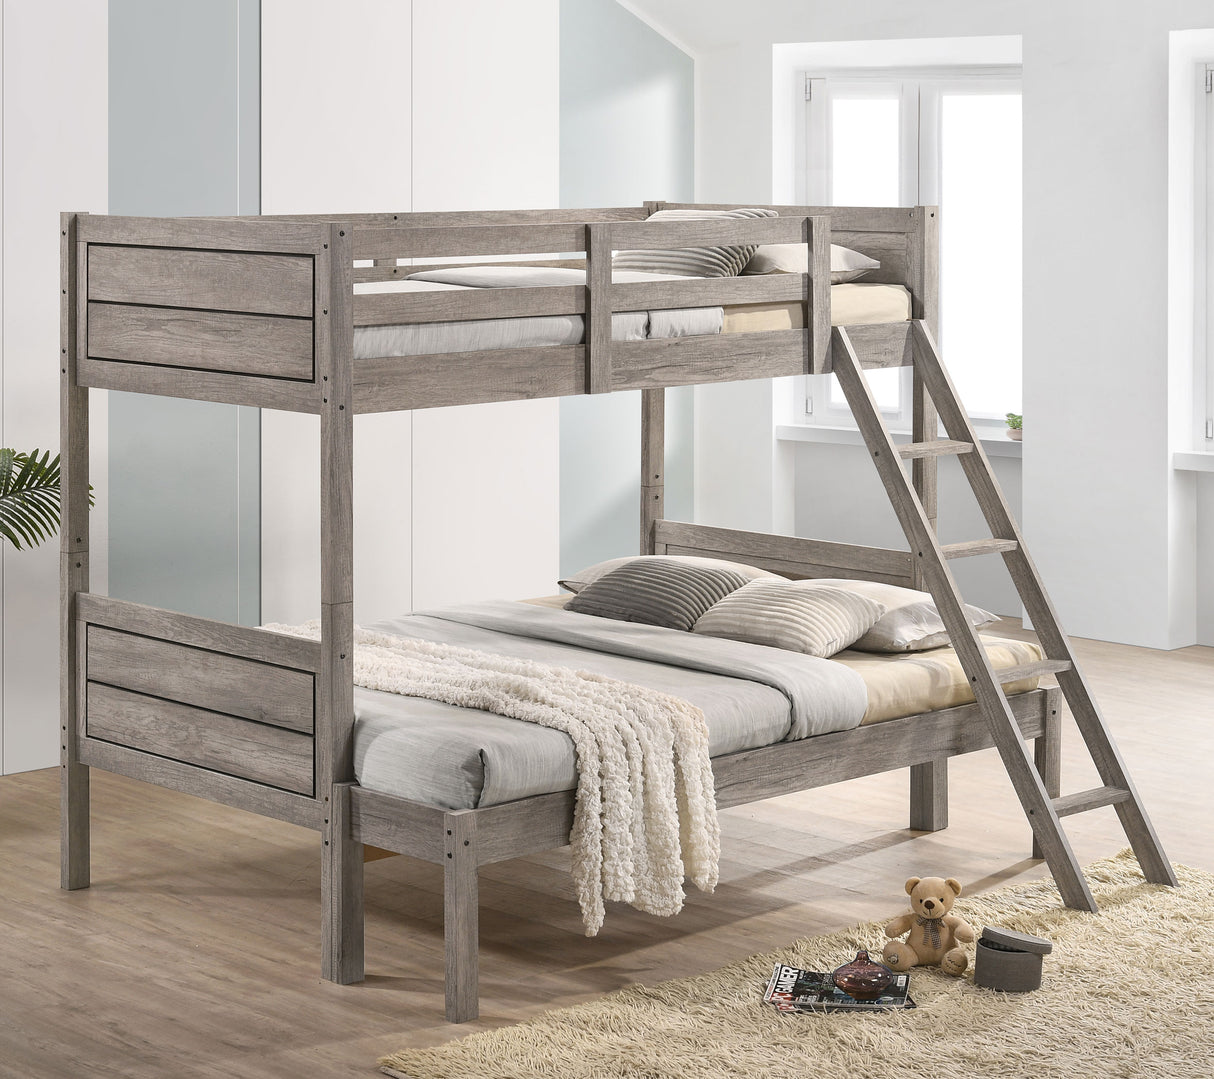 Twin / Full Bunk Bed - Ryder Twin Over Full Bunk Bed Weathered Taupe